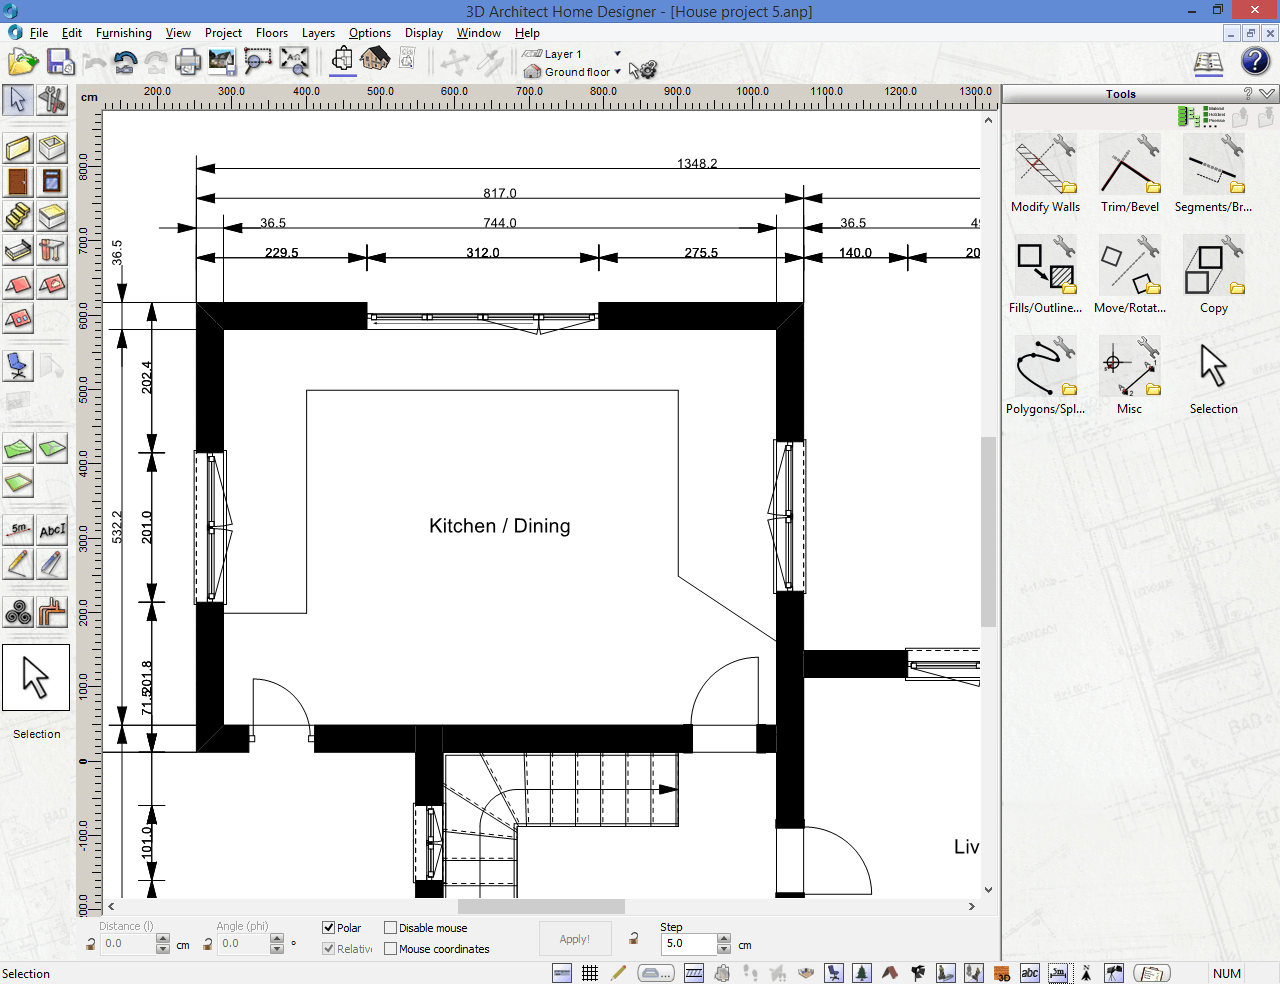 3D Architect House Designer Expert - Professional House and Floor Planner Software